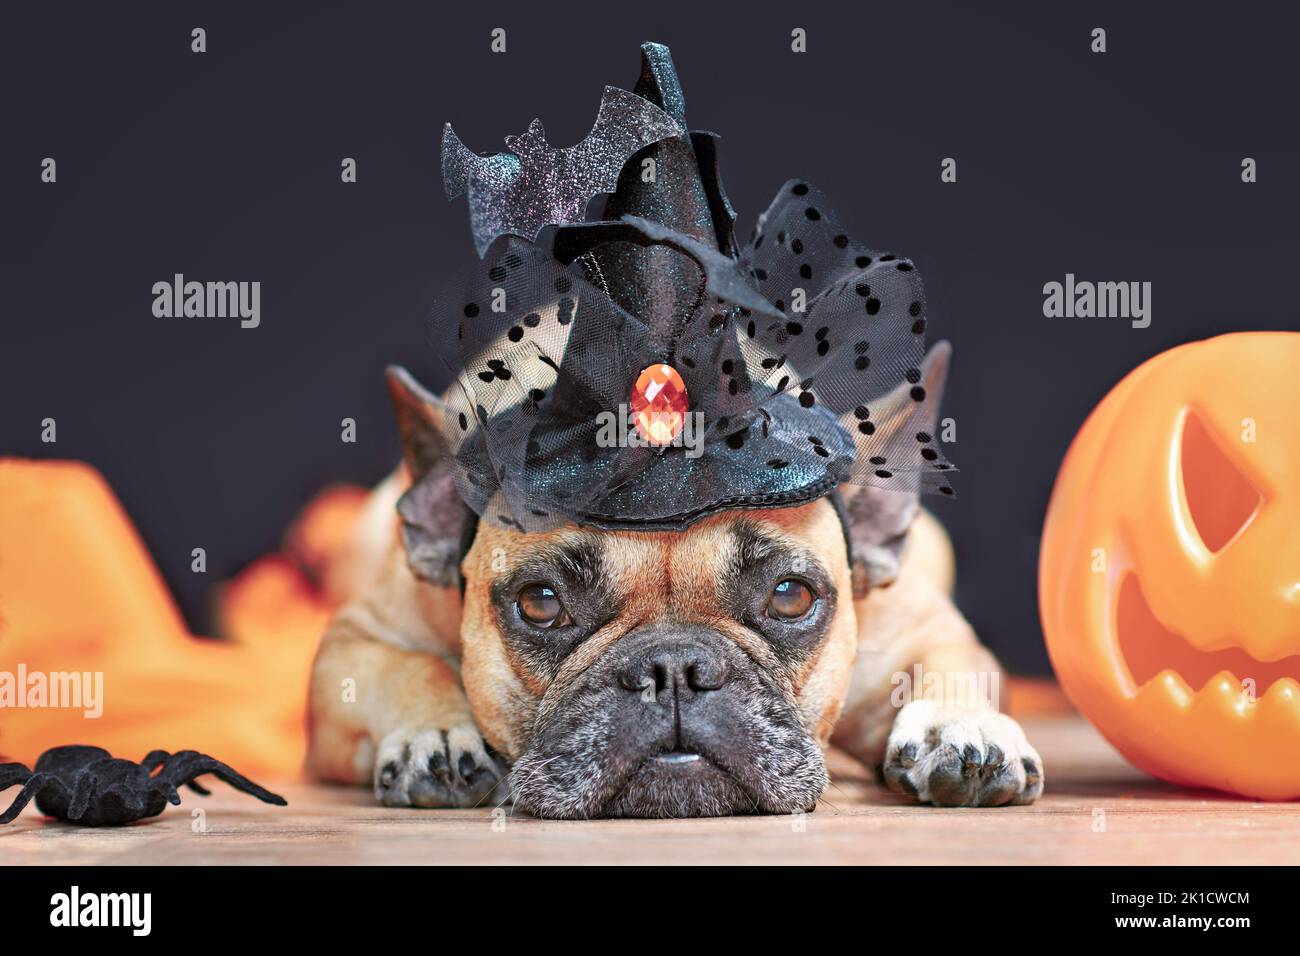 Cute French Bulldog dog with Halloween costume witch hat next to carved pumpkin lying down in front of black background Stock Photo